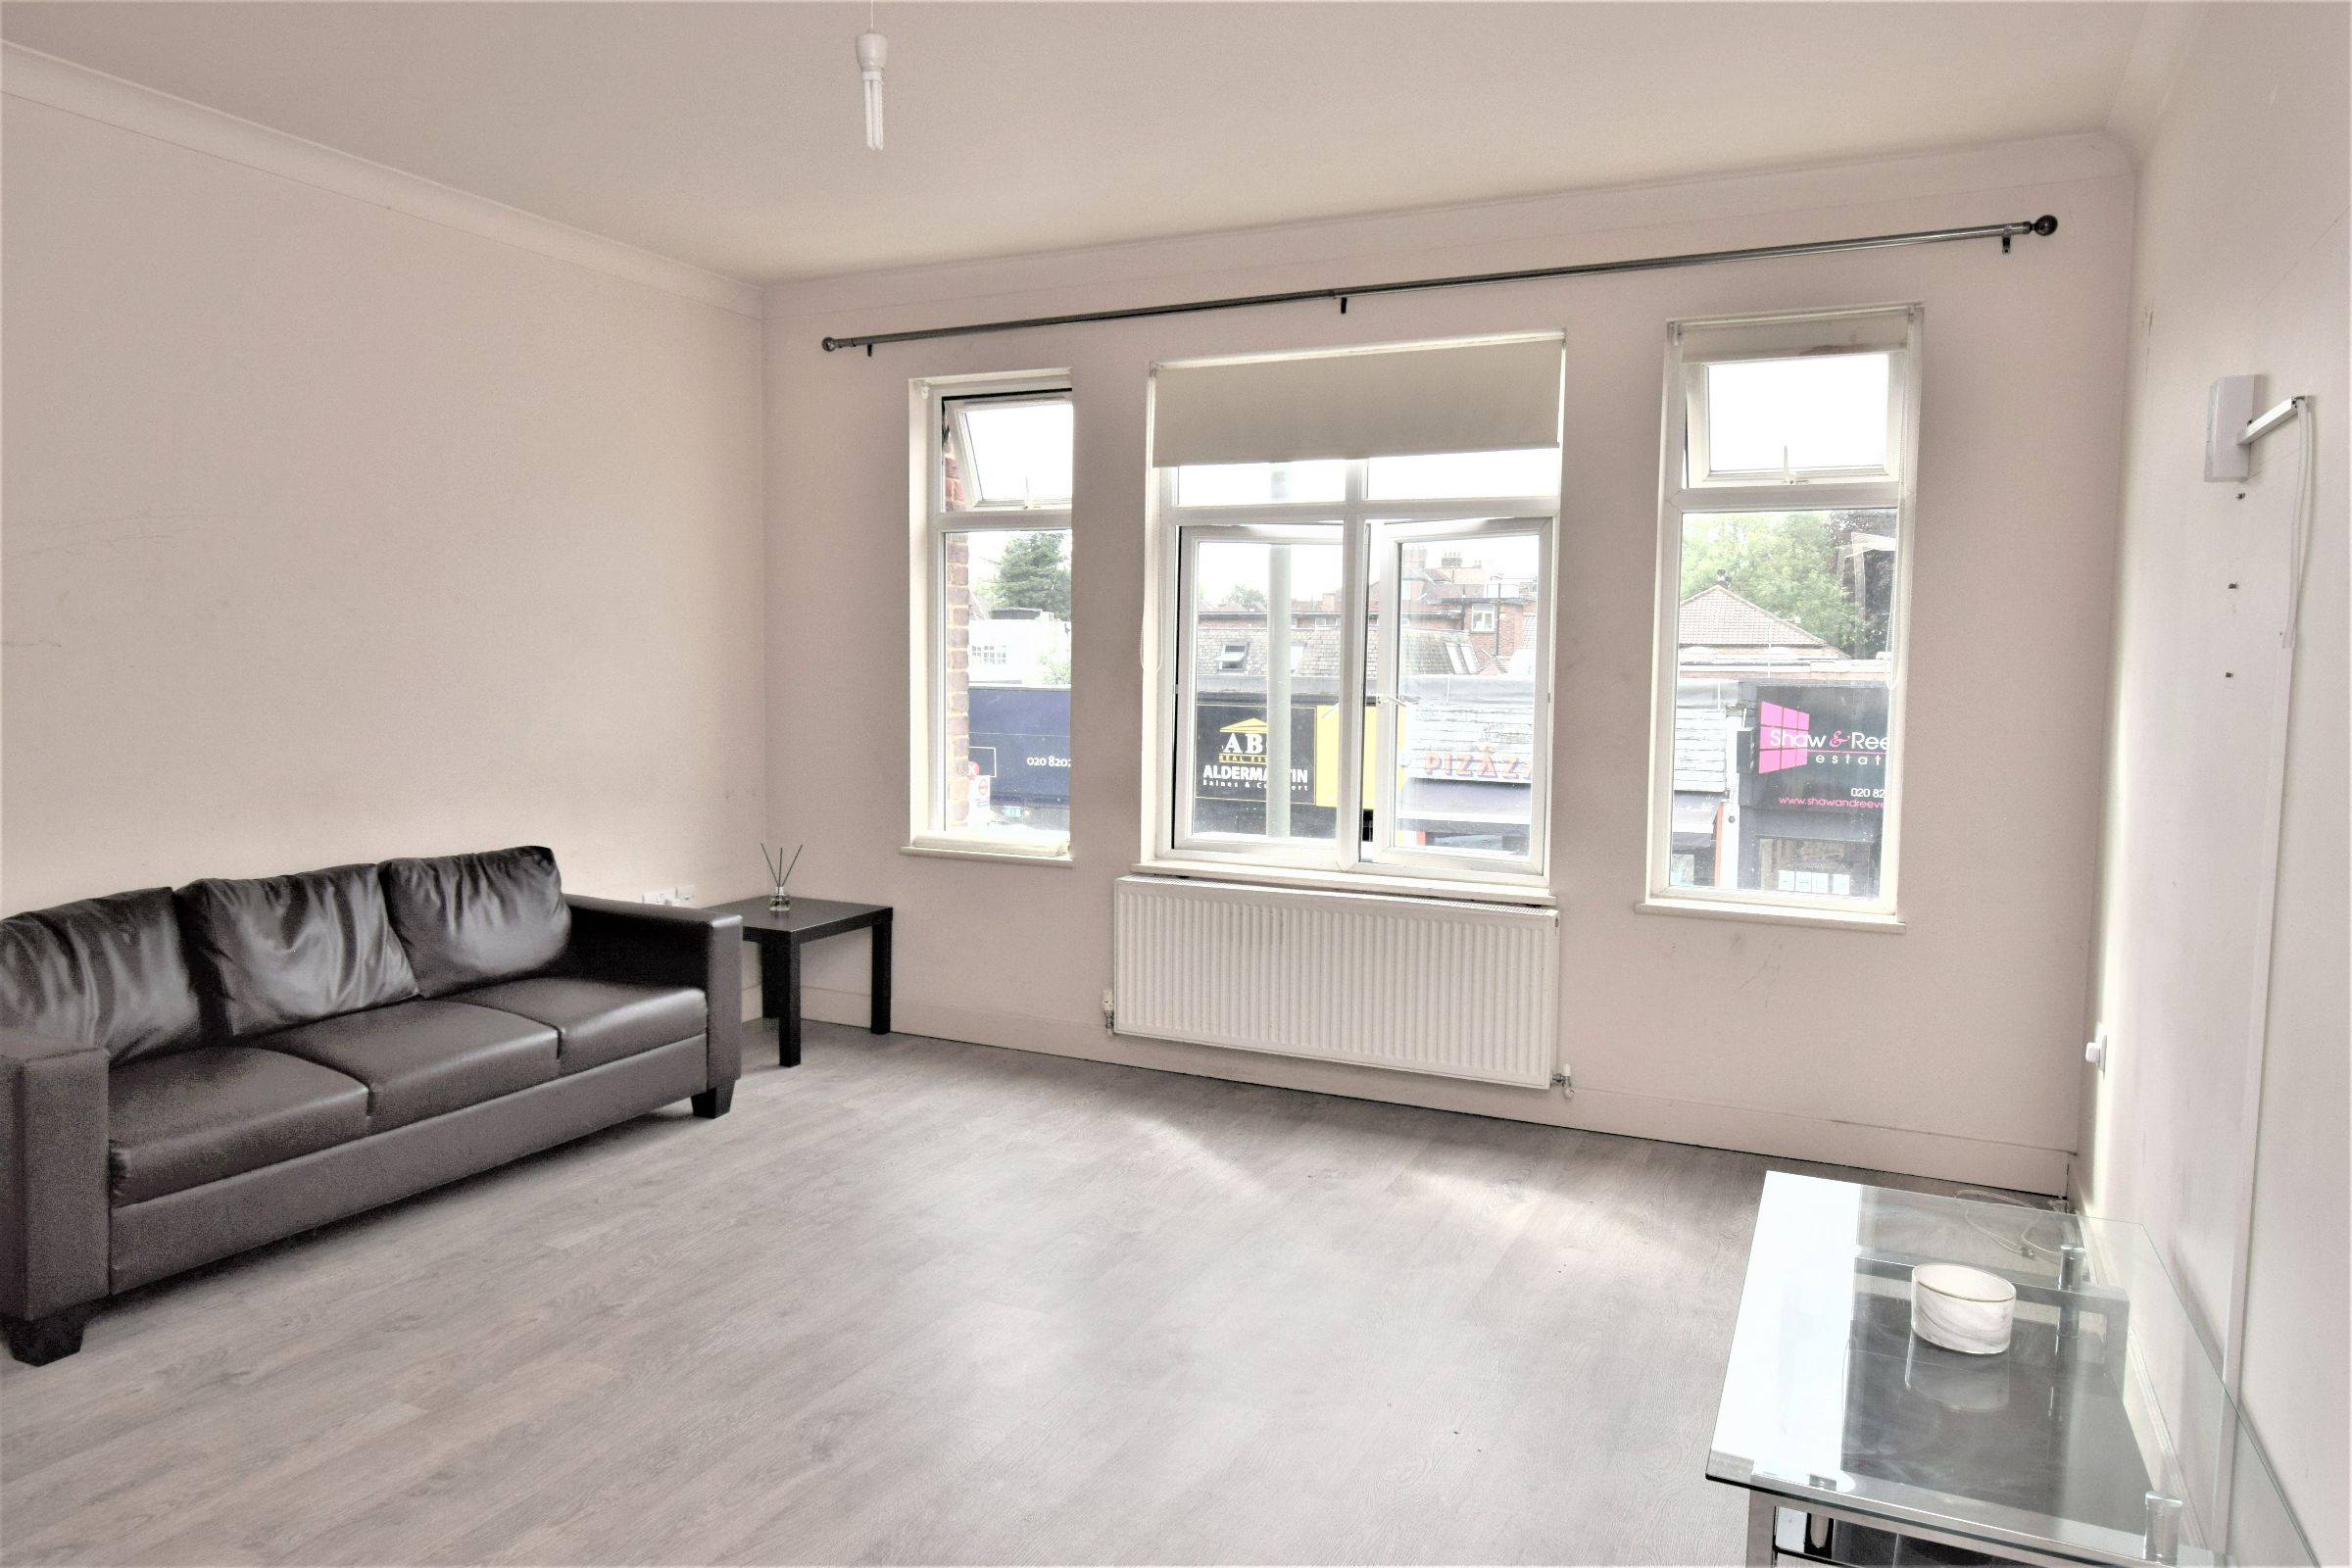 2 bed Flat for rent in London. From AbbeySpring London